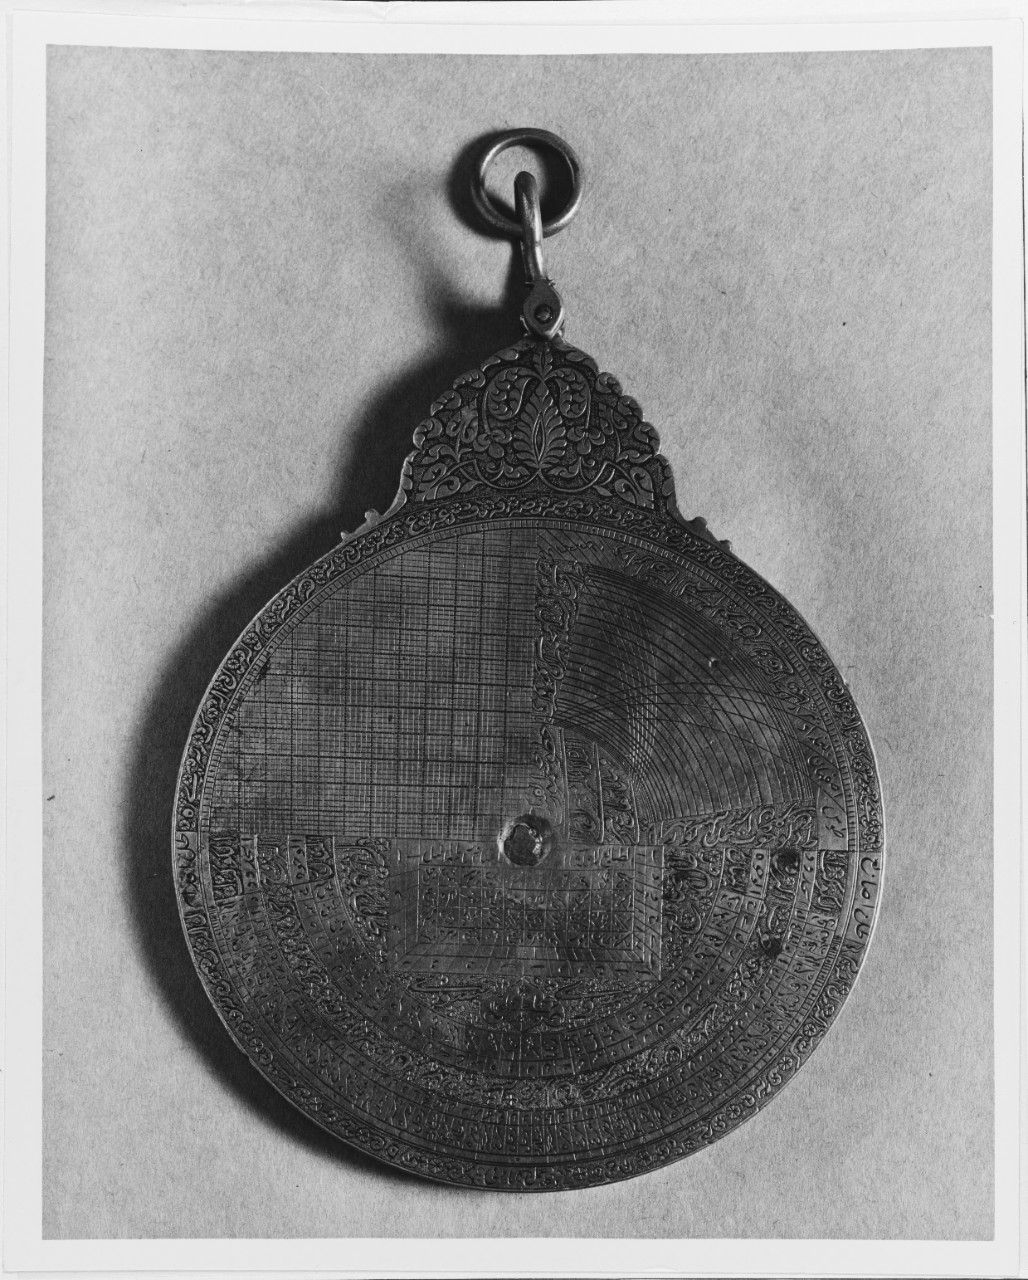 Back View of an Astrolabe